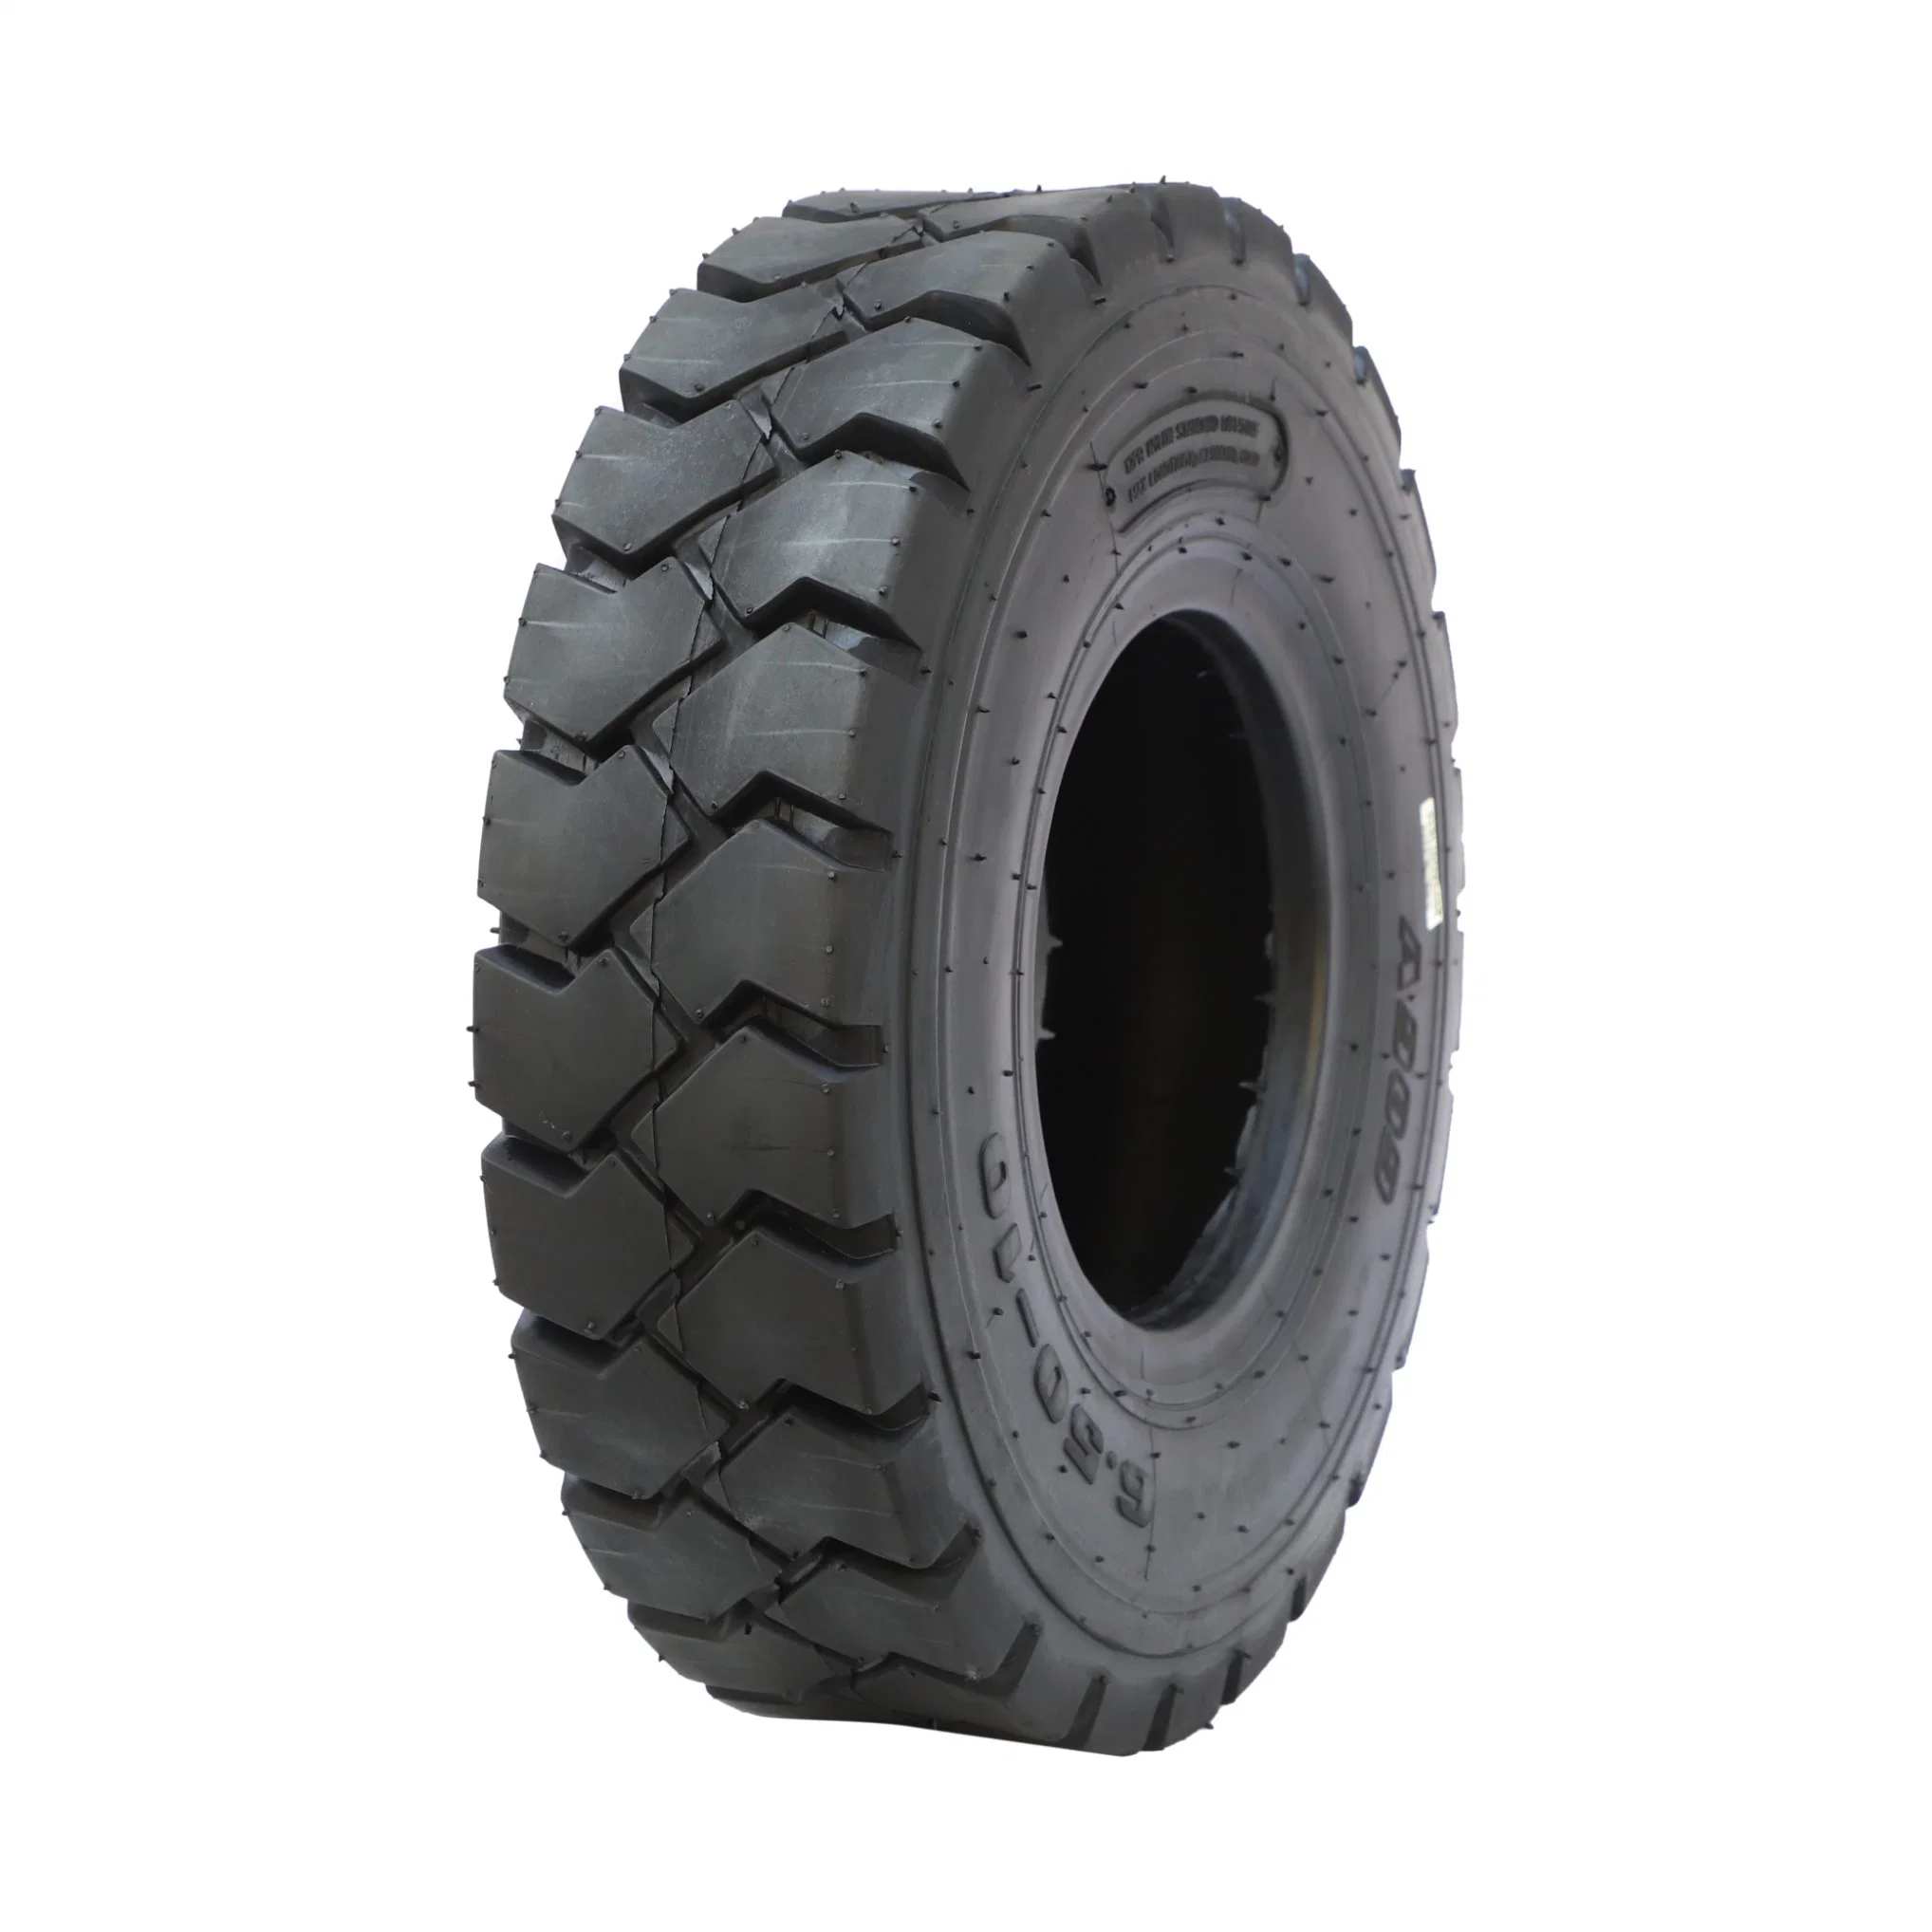 Rock King Brand A388 28X9-15 Forklift Tire Inudstrial Tires Construction Tyre Construction Tire